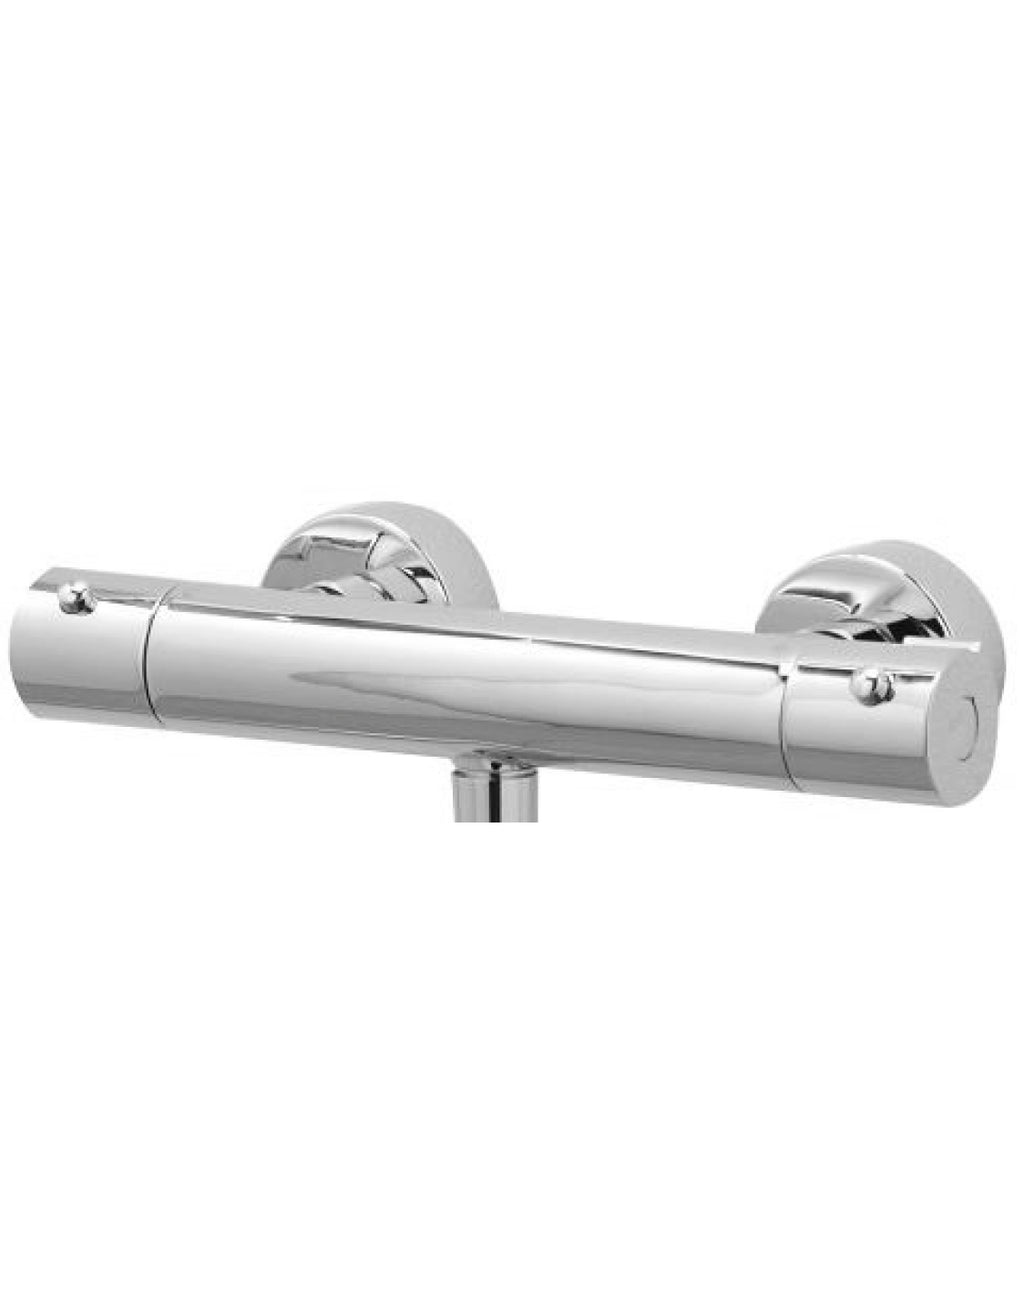 Methven Maku Cool Touch Thermostatic Bar Shower